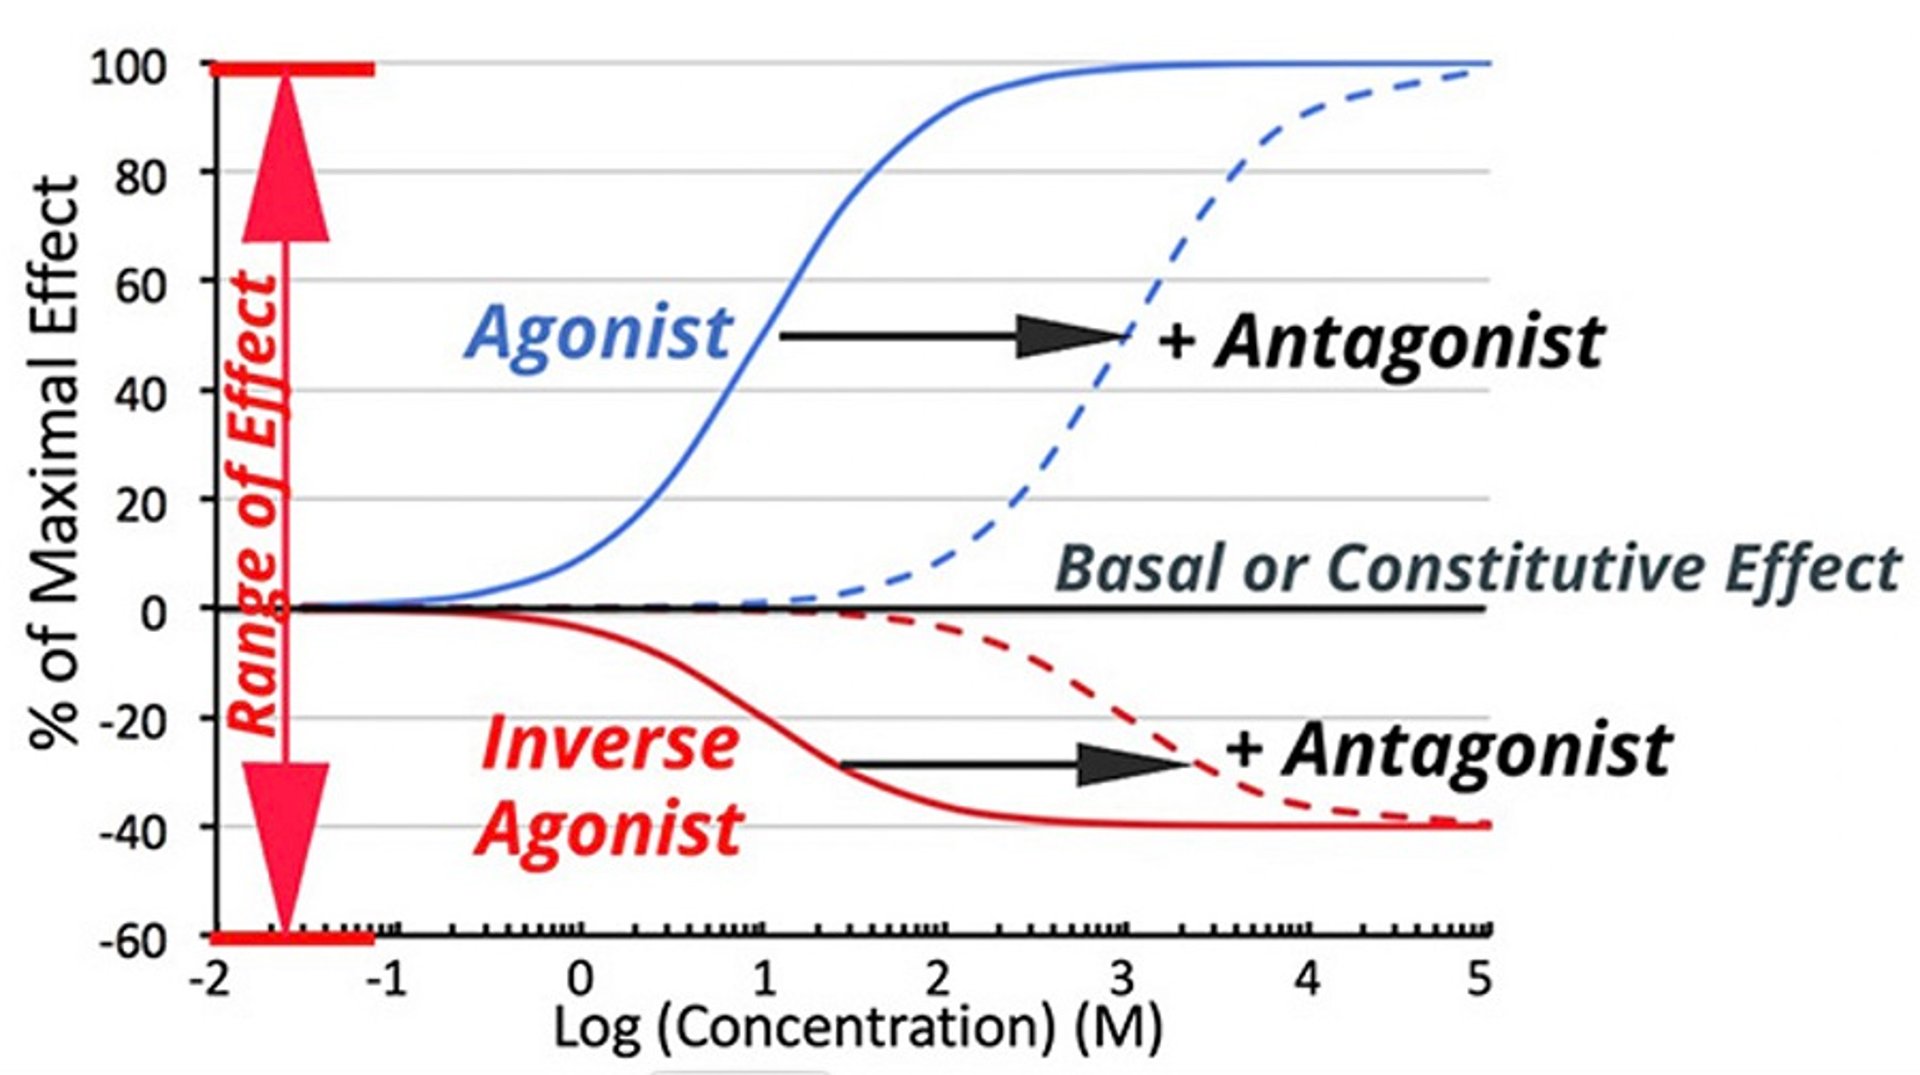 Dose-response curve for inverse agonists compared to full agonists